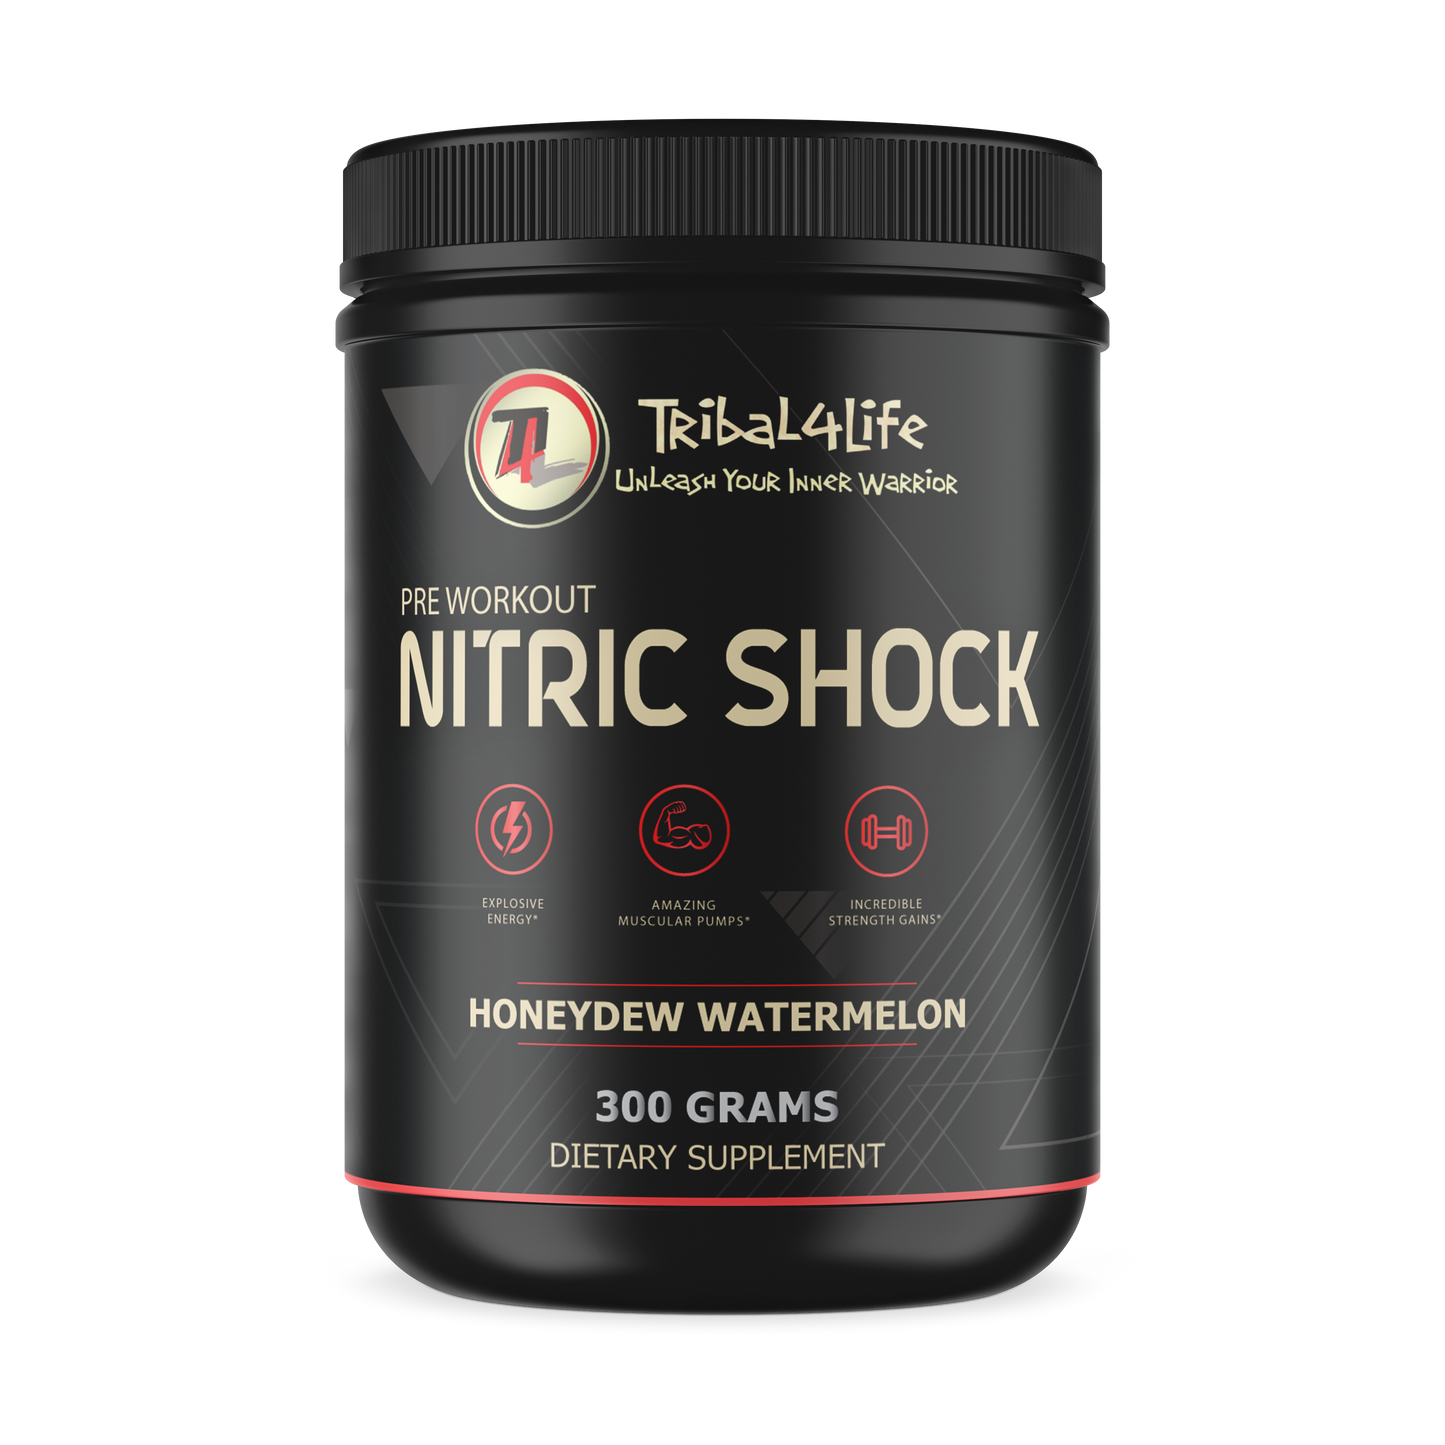 PRE WORKOUT - Nitric Shock Dietary Supplement